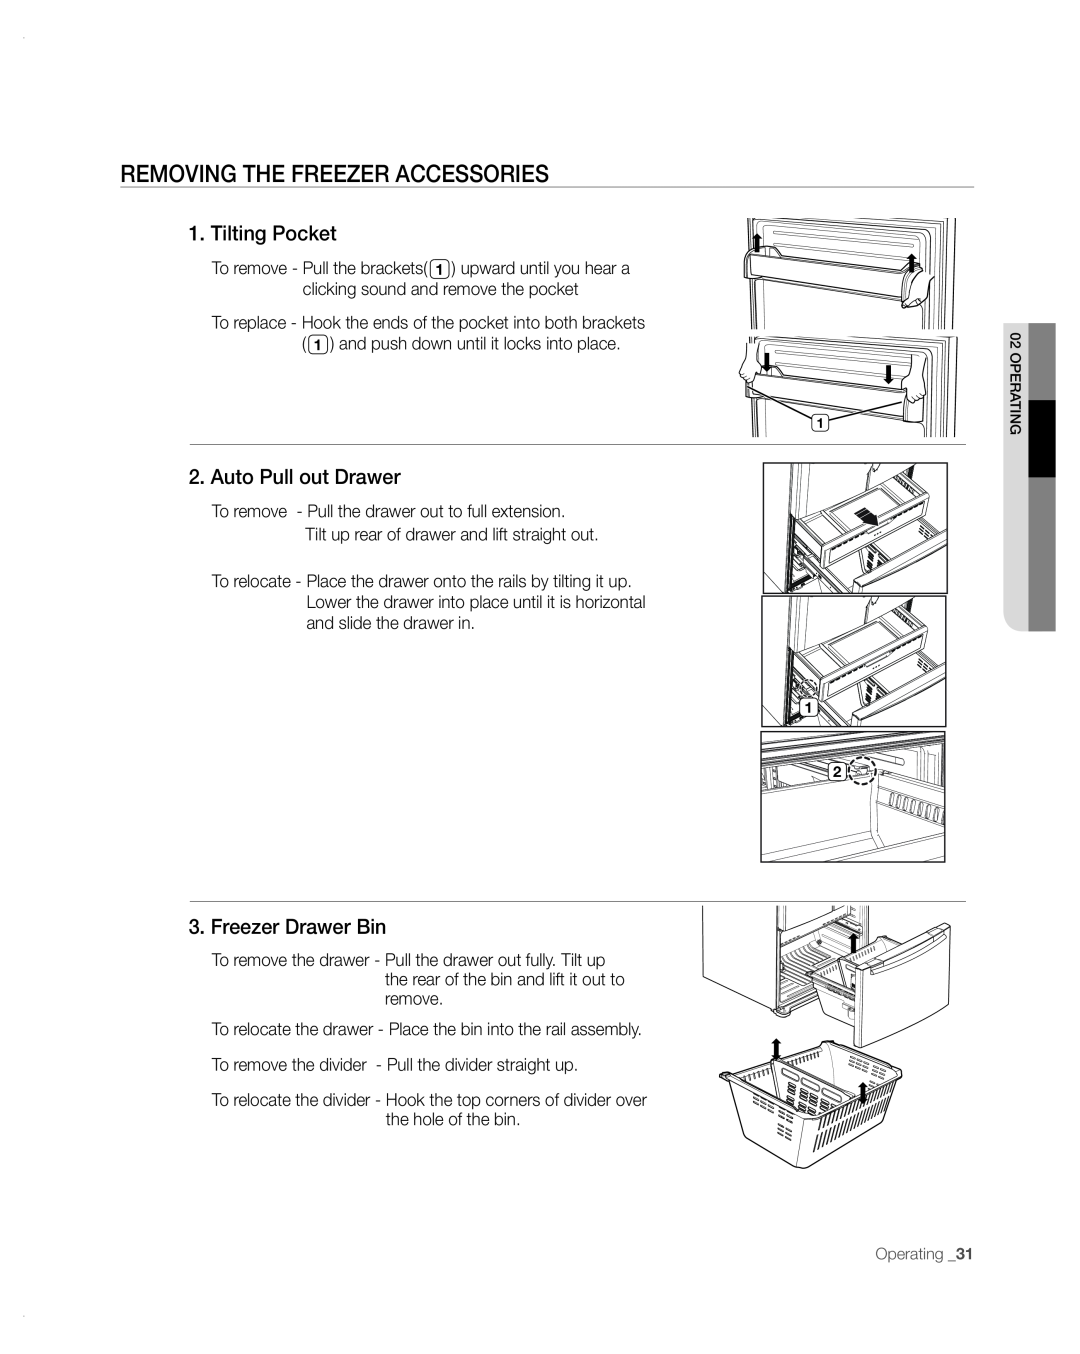 Samsung RFG297AA user manual Removing The Freezer Accessories, Tilting Pocket, Auto Pull out Drawer, Freezer Drawer Bin 